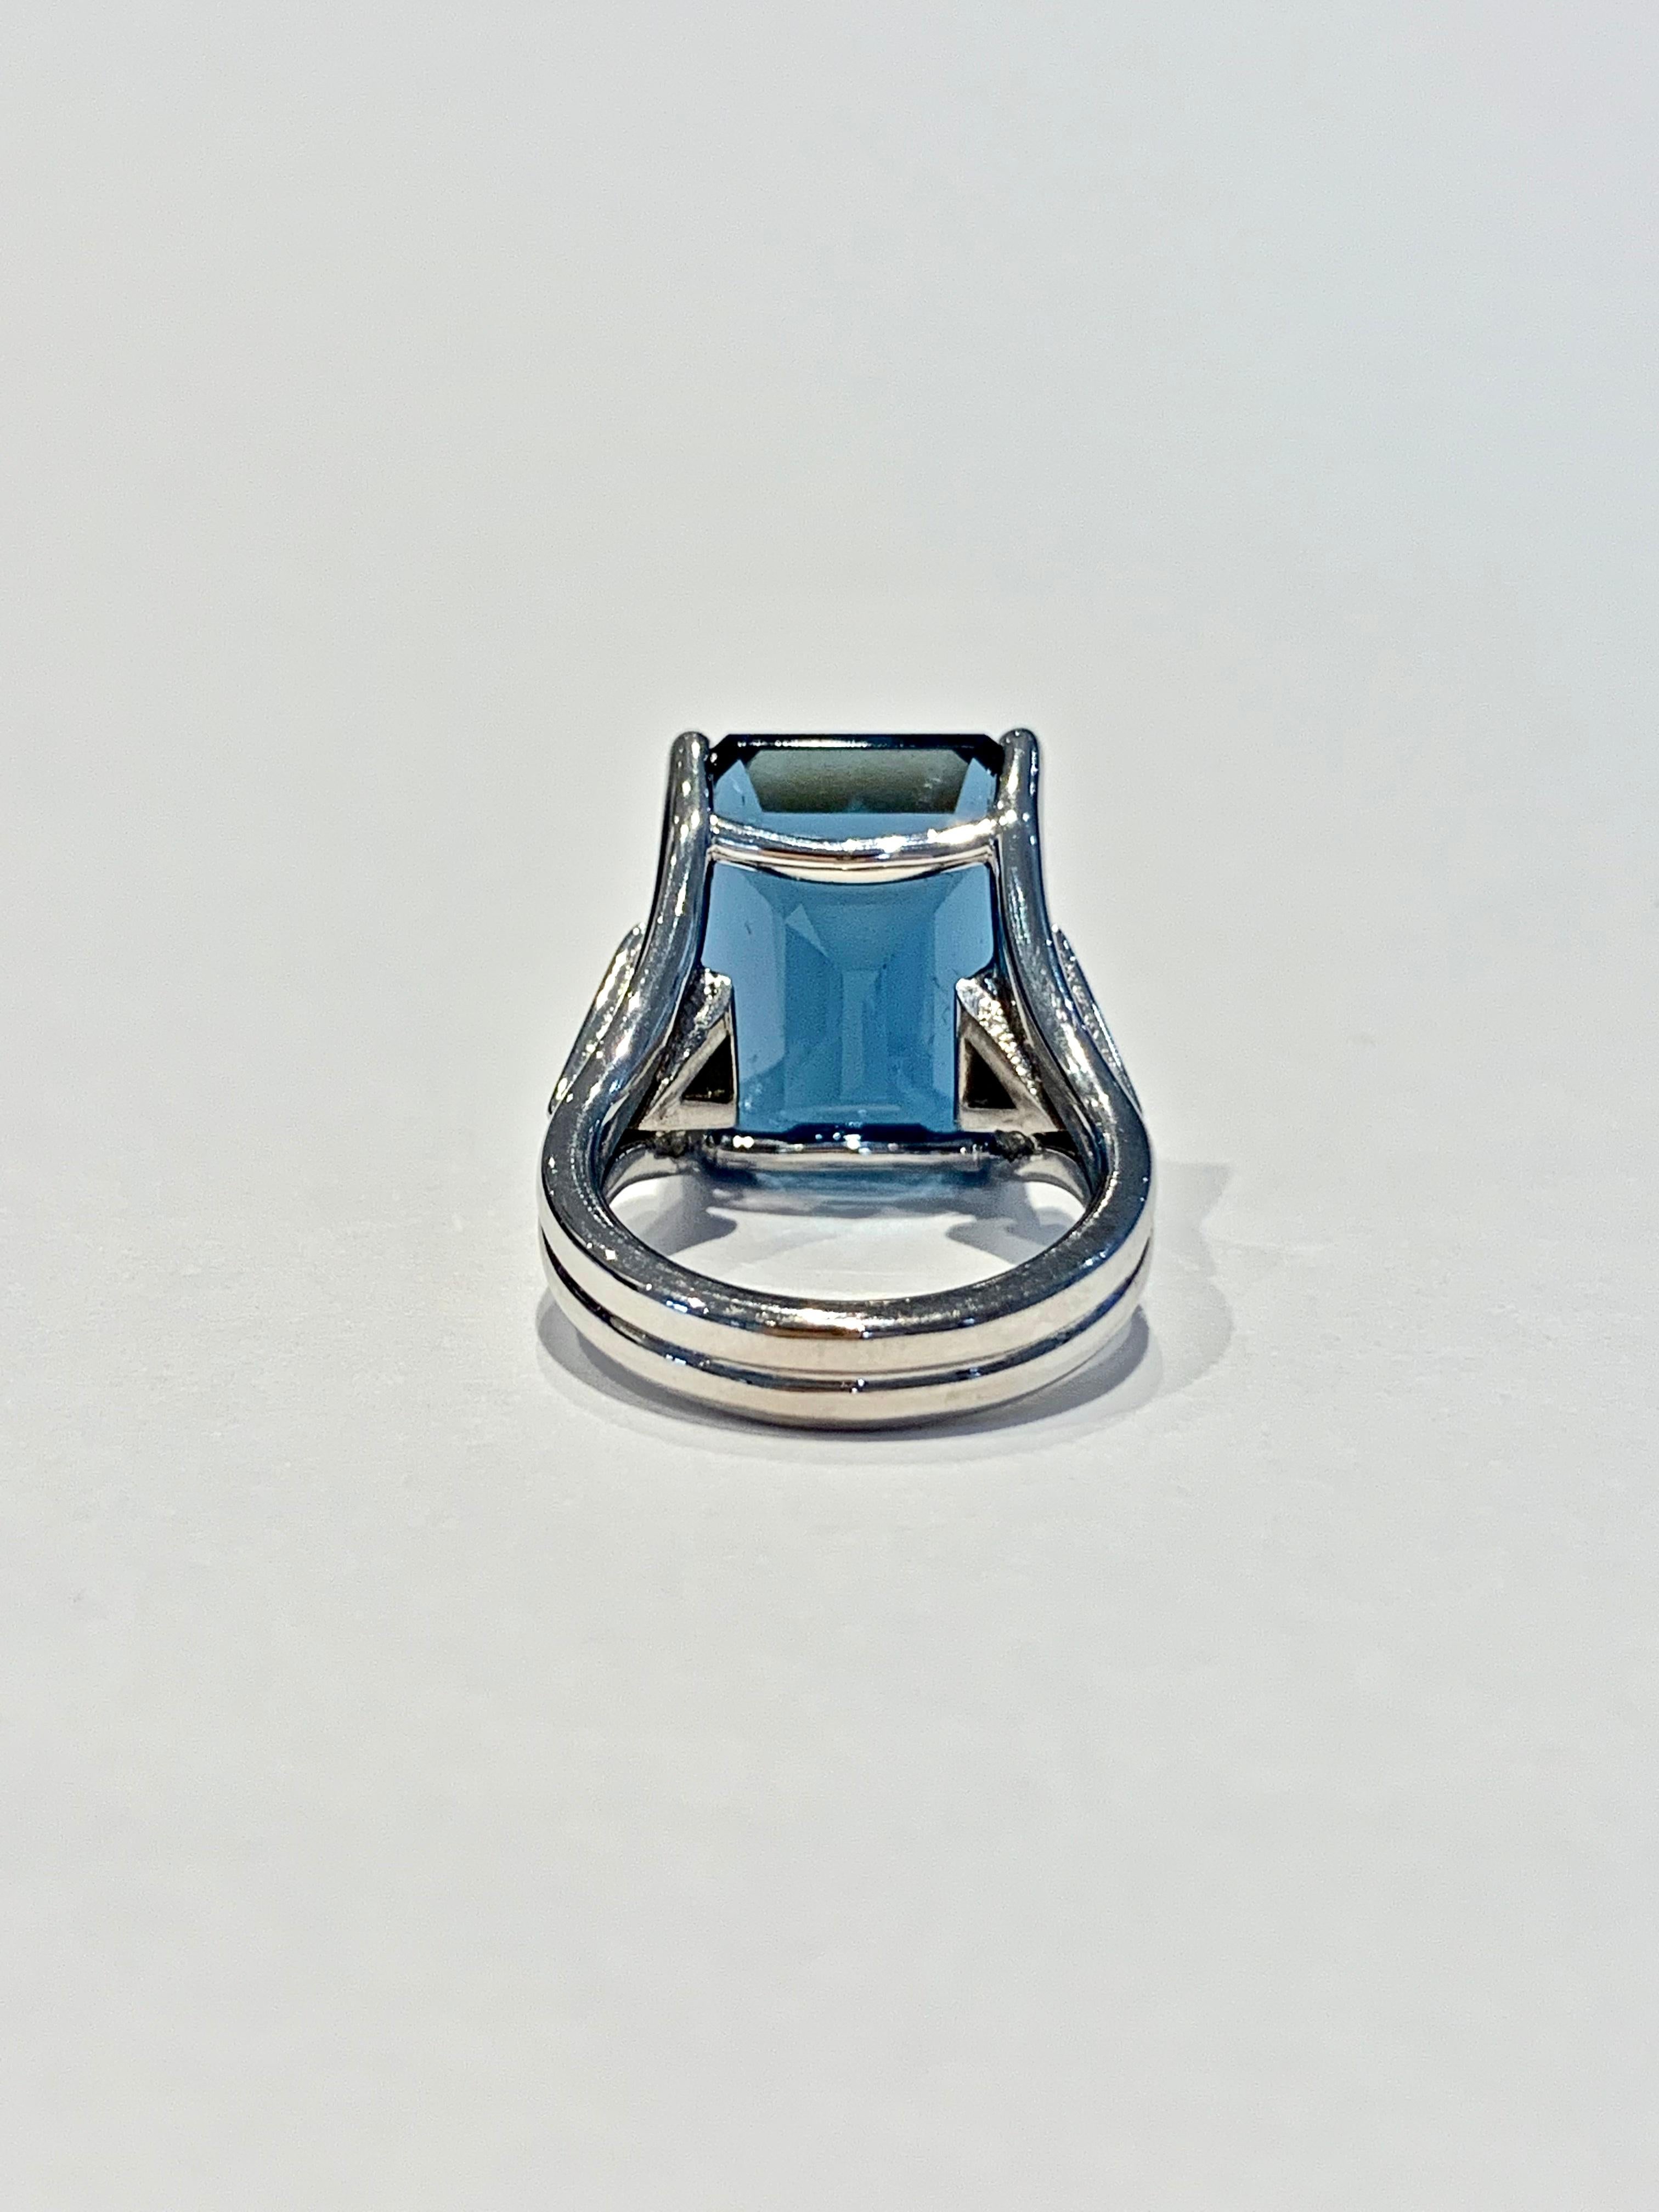 Modern Bespoke 7.20ct Octagon Cut London Blue Topaz and Diamond Ring in 18ct White Gold For Sale